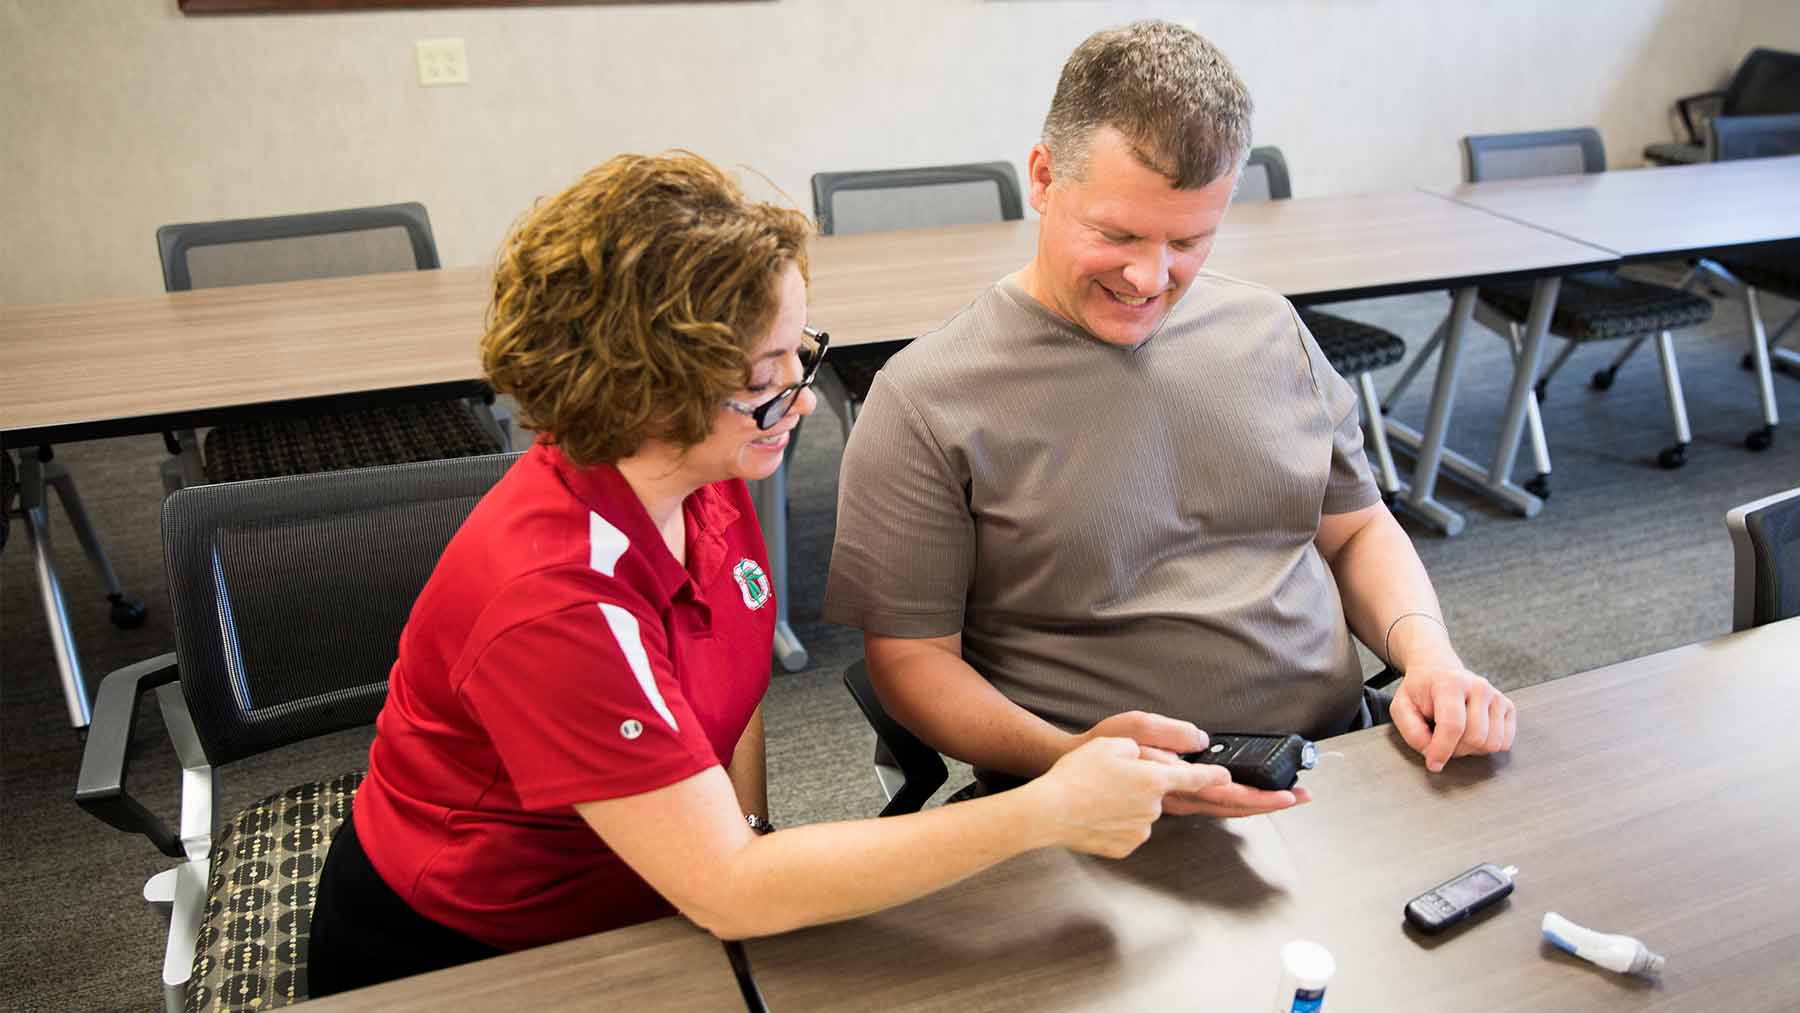 Ohio State's Janet Zappe shows Jeffrey Walline features of a new hybrid blood sugar monitor and insulin pump system.